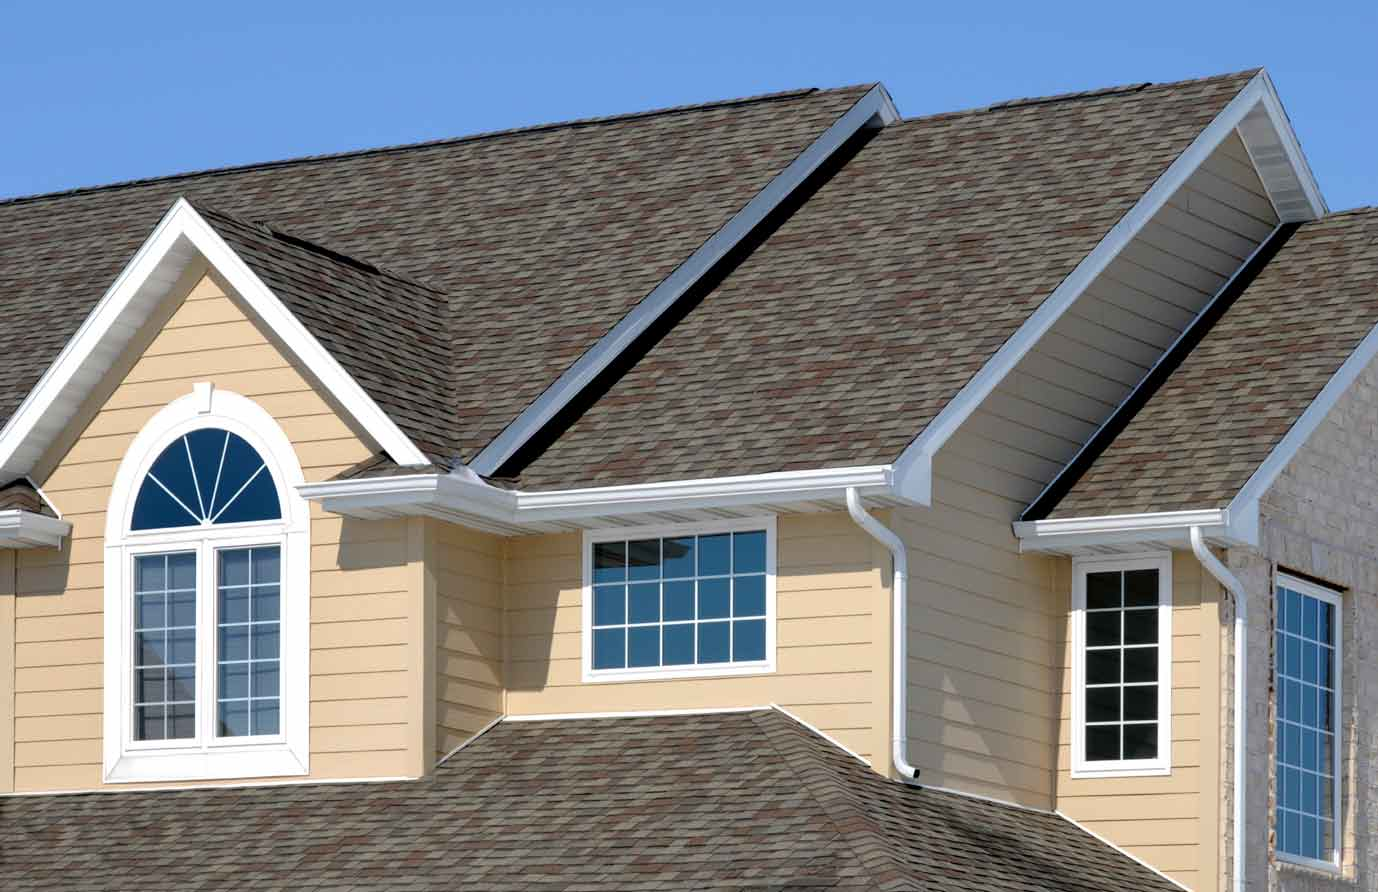 What Exactly Does a Roofing Warranty Cover?